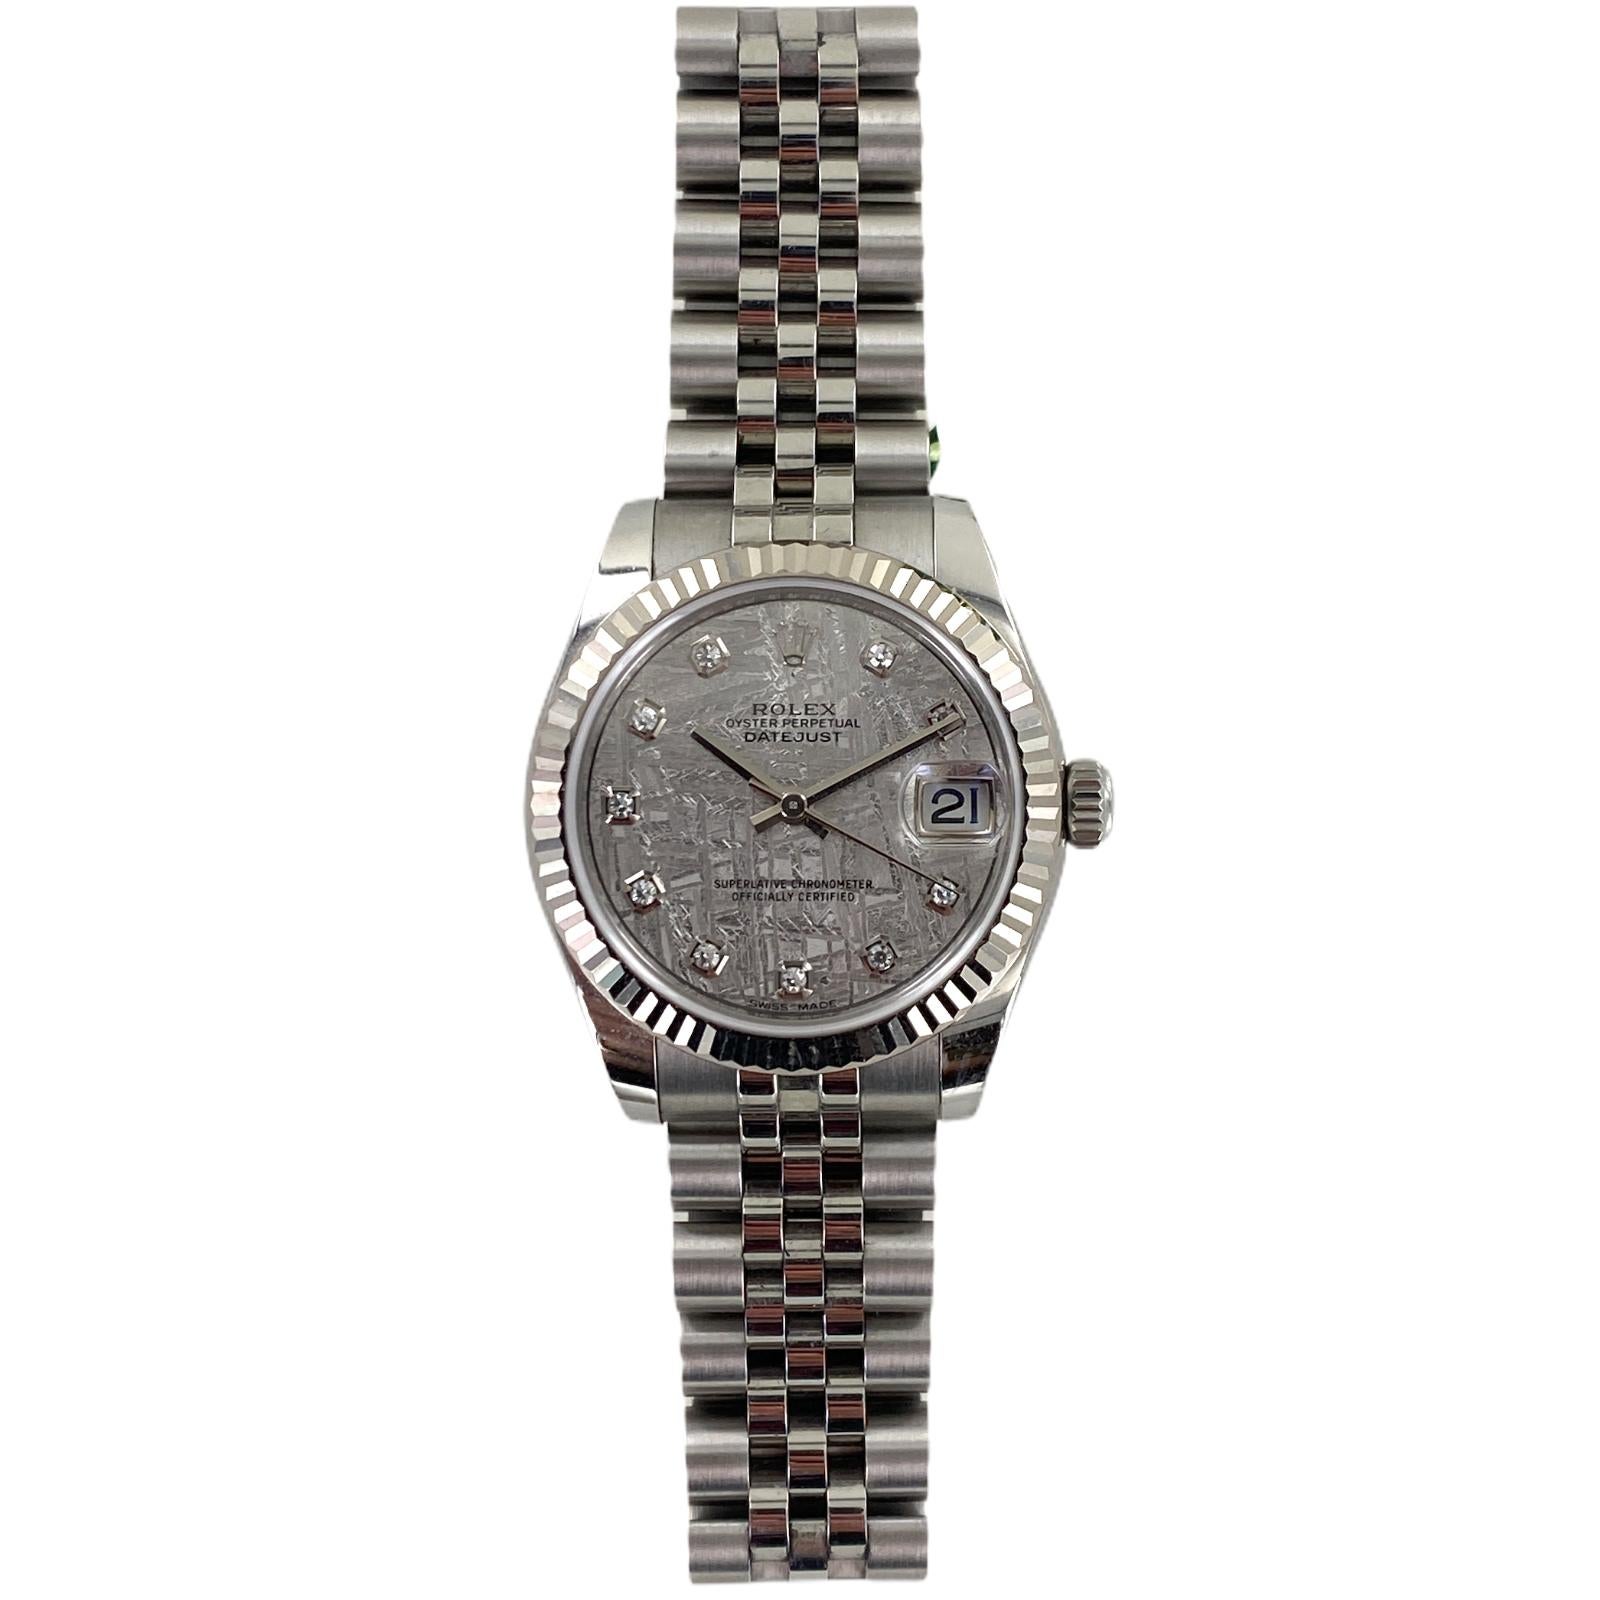 Oyster Perpetual Rolex Datejust 31mm. The watch is circa 2018, features sapphire crystal, white gold fluted bezel, Jubilee bracelet, and Meteorite 10 diamond dial.  Reference #: M178274-0016-63160  Serial # 47L....  ,  Box and Papers-Excellent